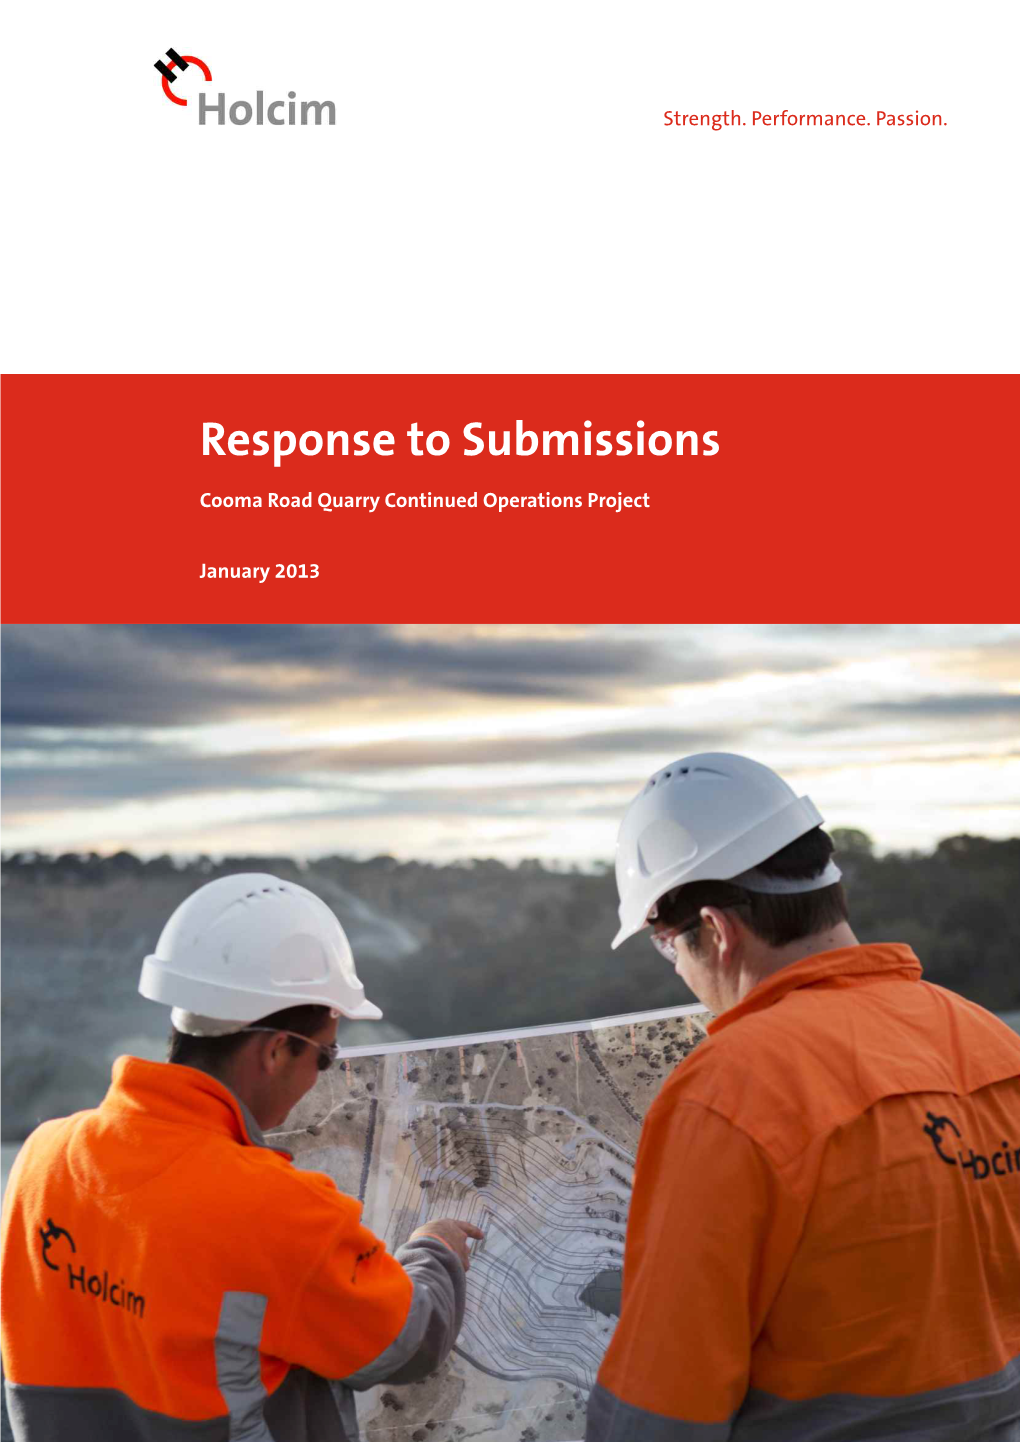 COOMA ROAD QUARRY CONTINUED OPERATIONS PROJECT Response to Submissions